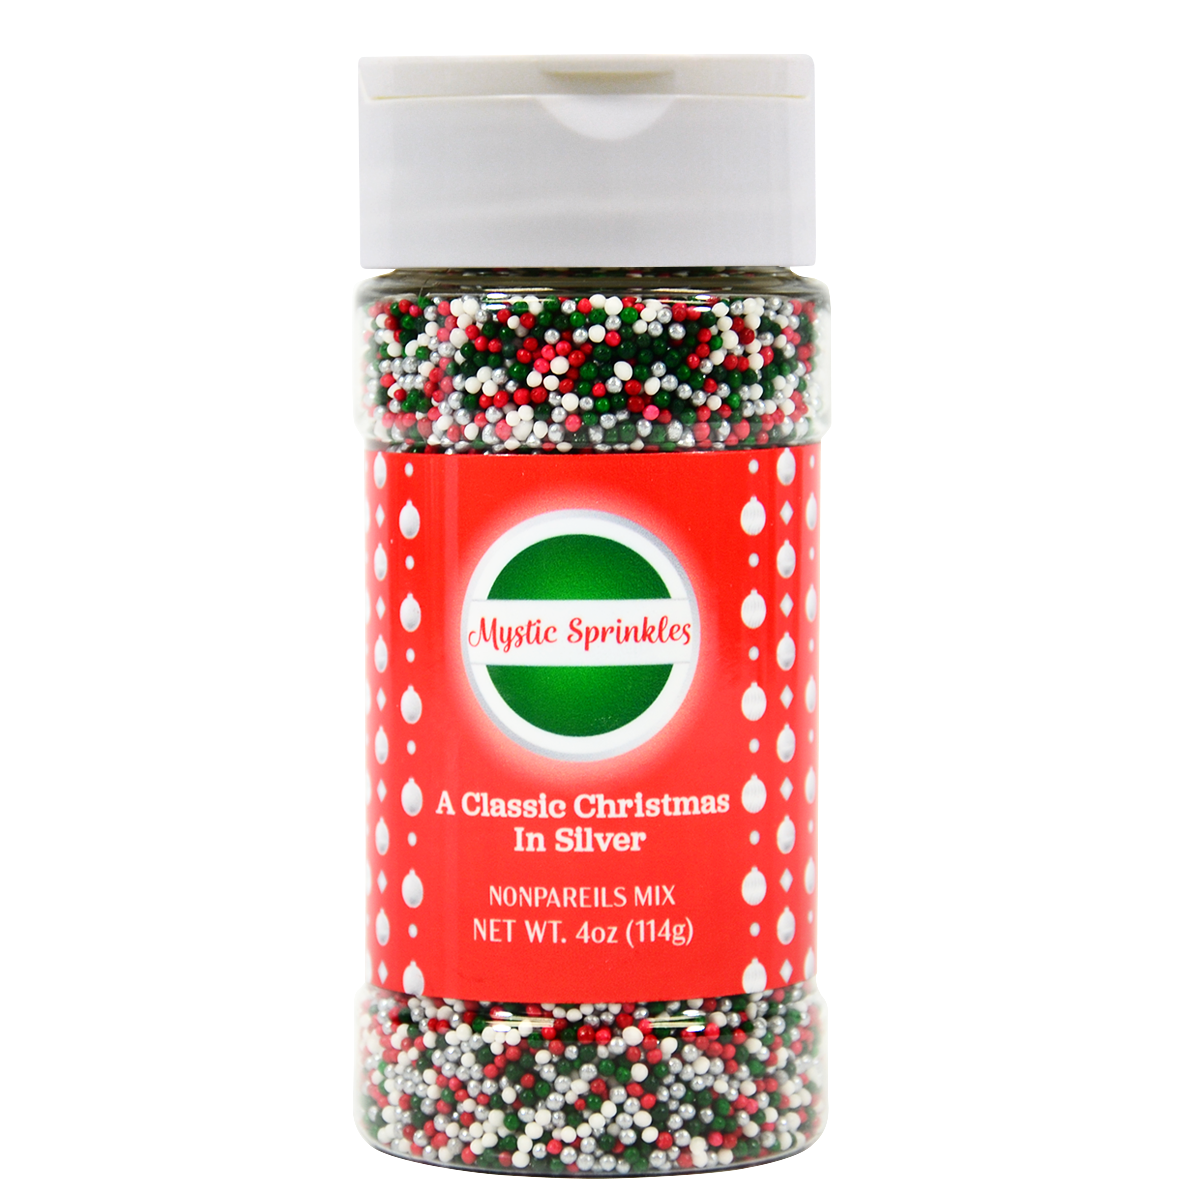 A Classic Christmas in Silver Nonpareil Mix 4oz Bottle